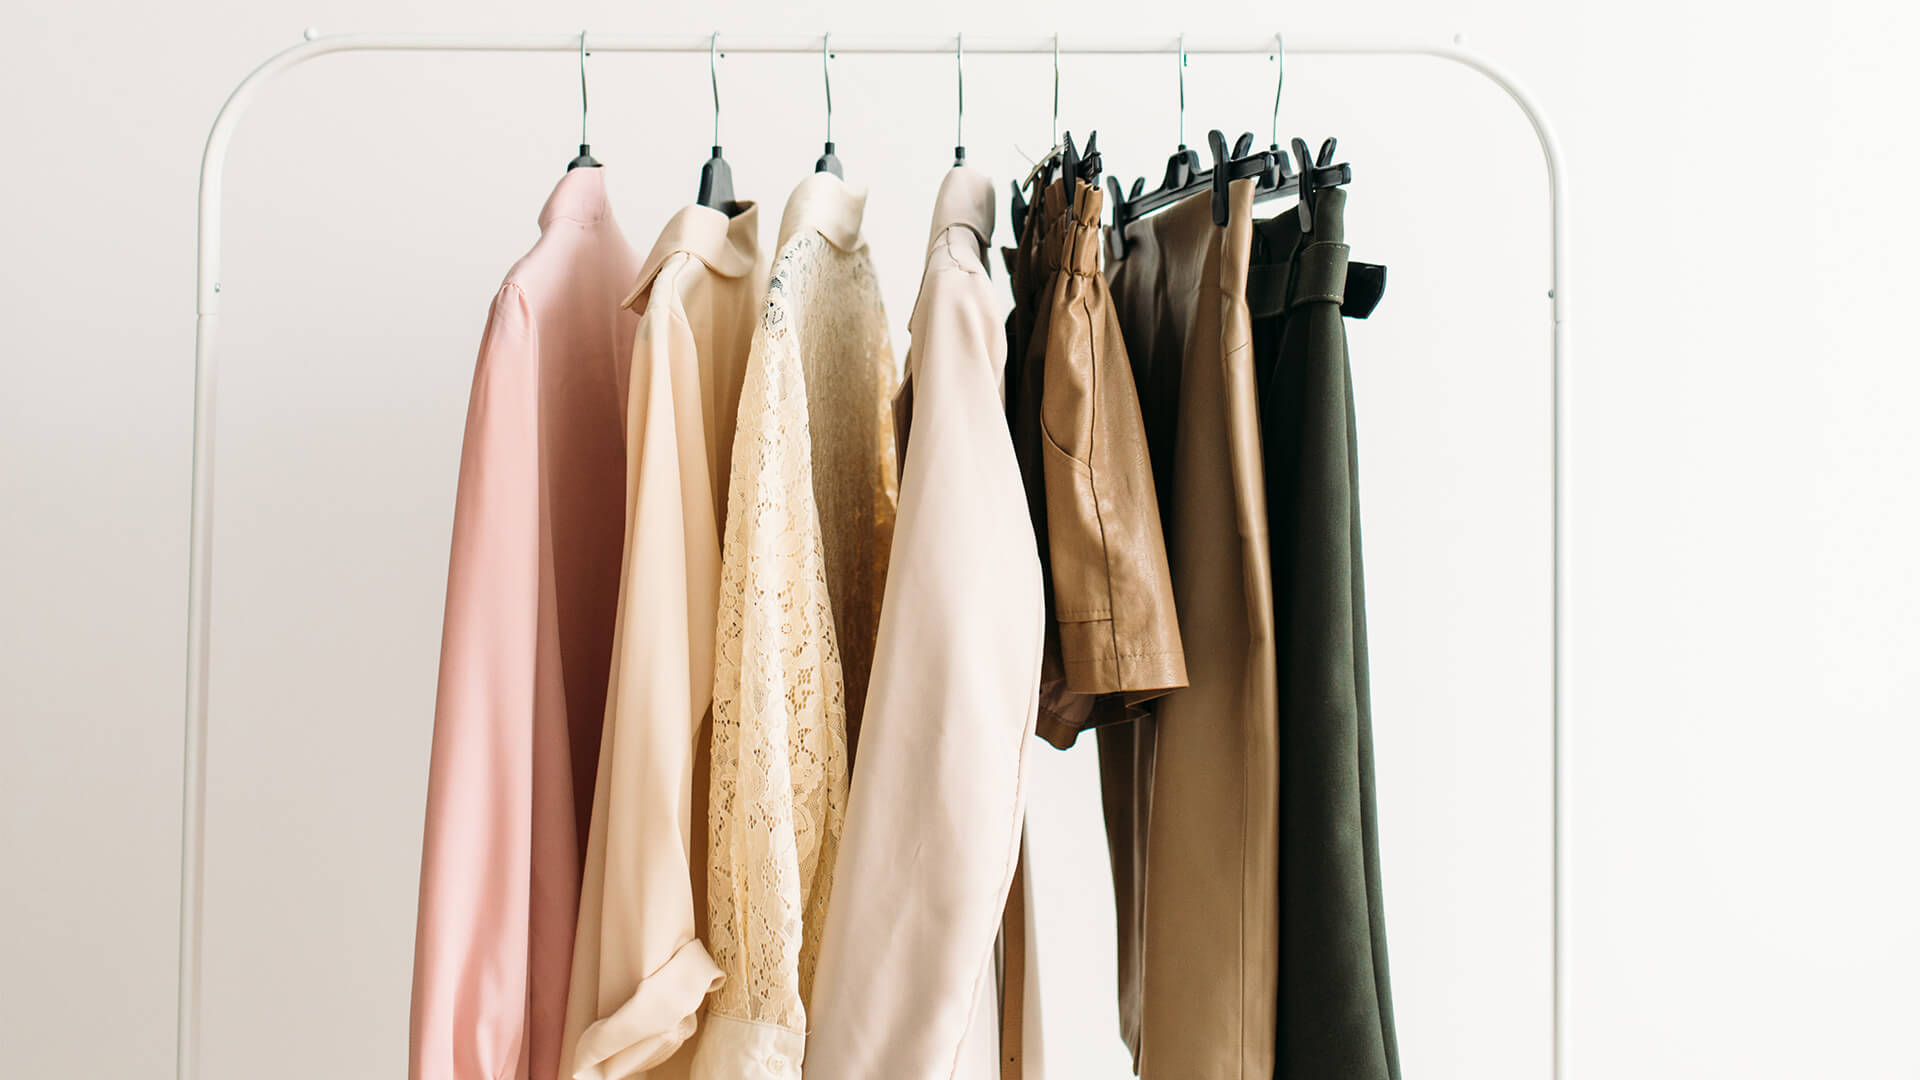 Capsule wardrobe style clothes on a rack